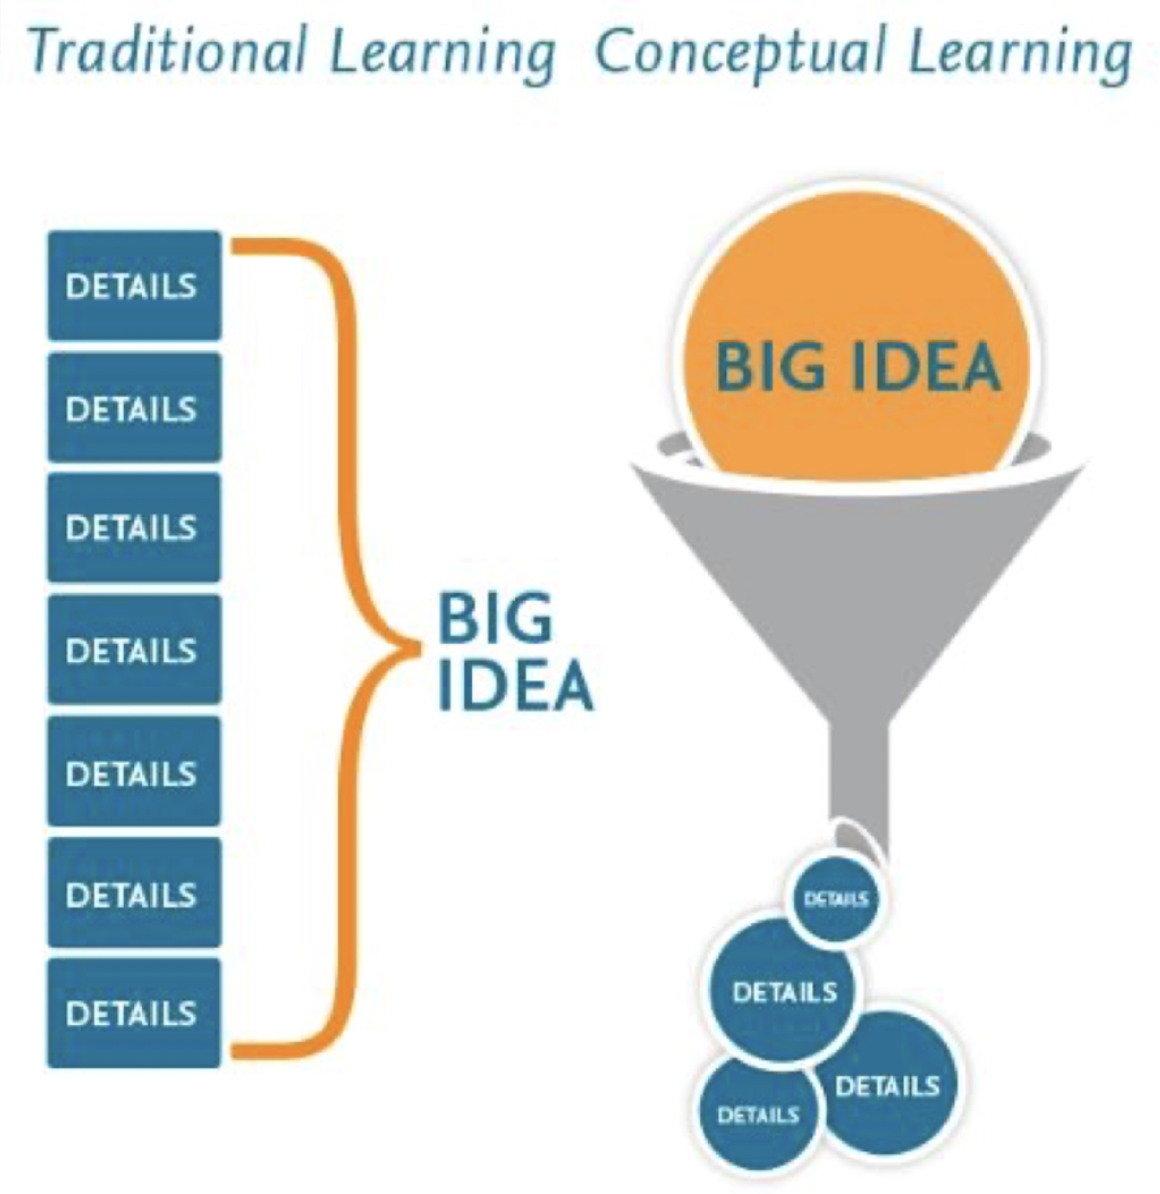 Learning Concept model